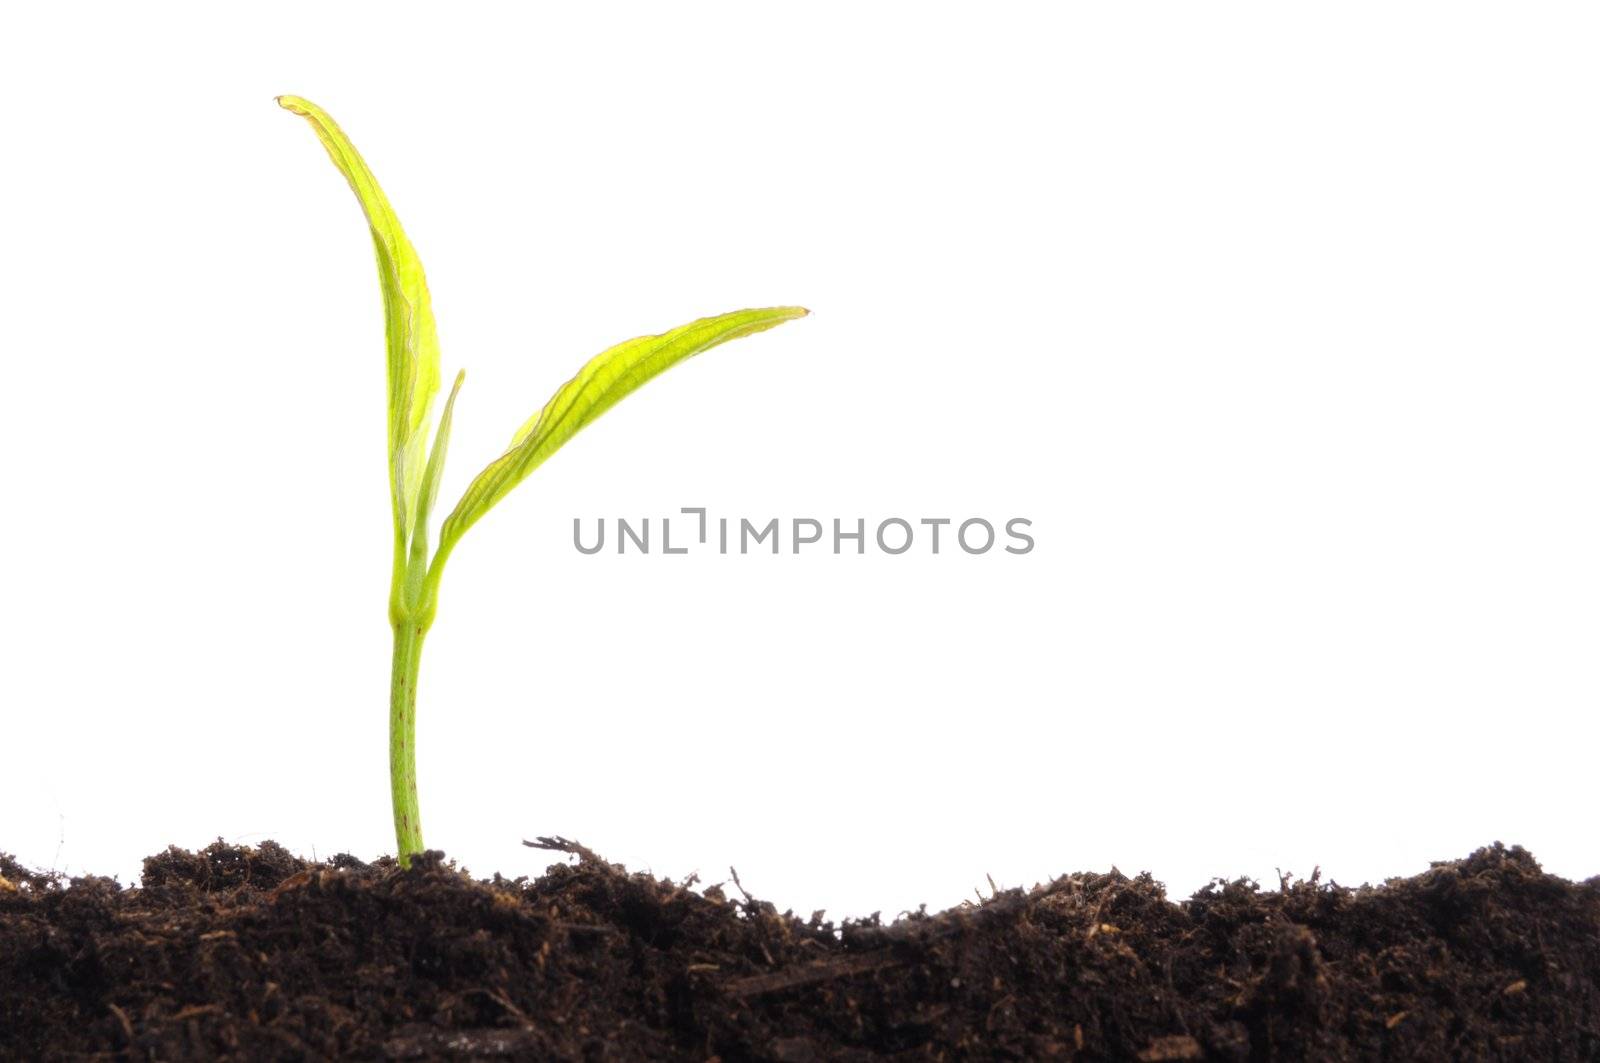 business growth concept with ypoung plant and soil on white background